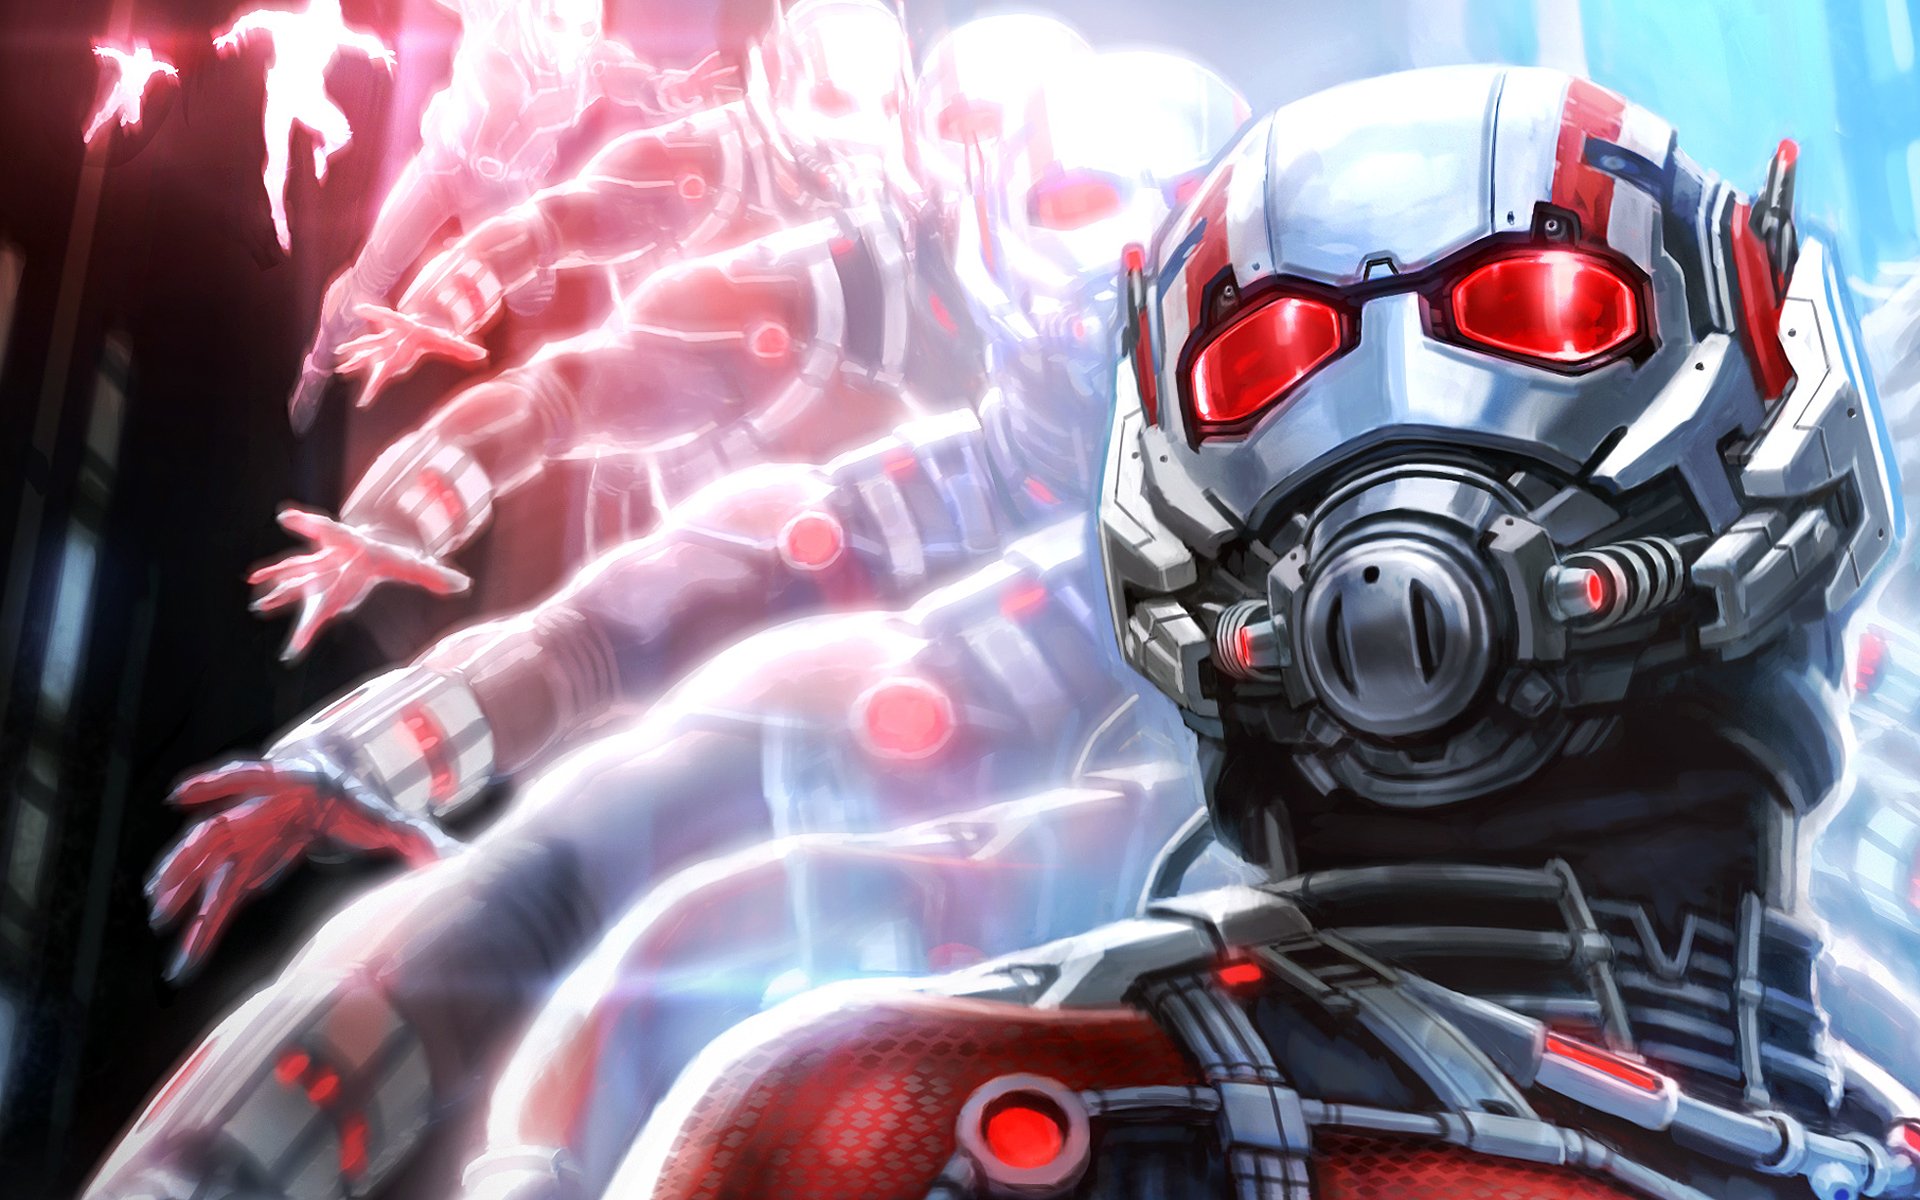  marvel action ant man wallpaper 1920x1200 522378 WallpaperUP